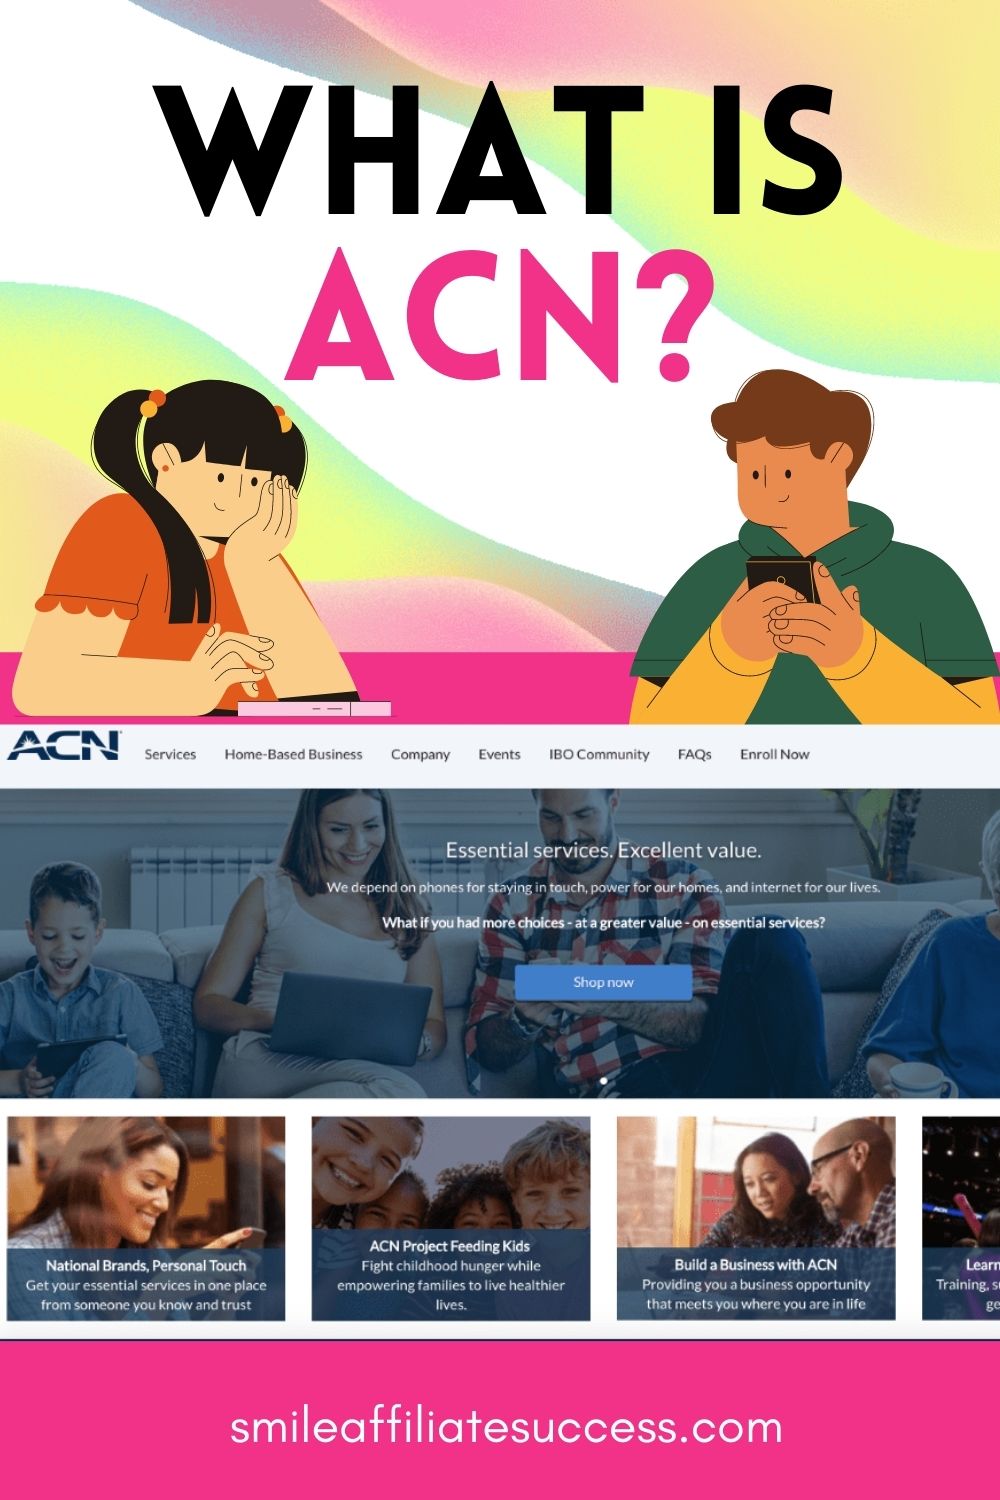 What Is ACN?